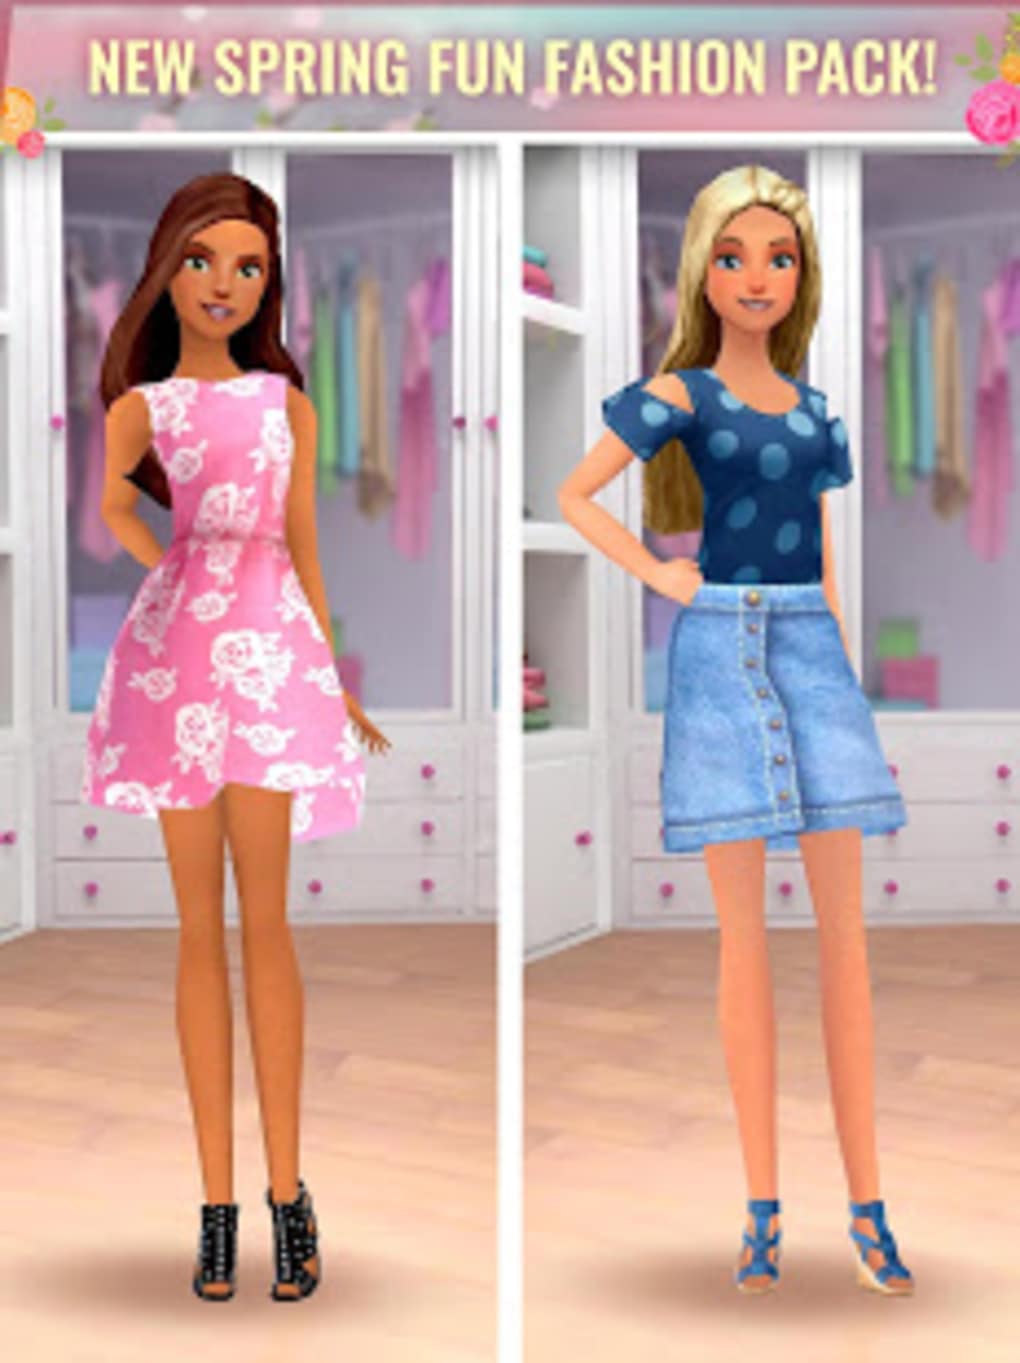 barbie game apps